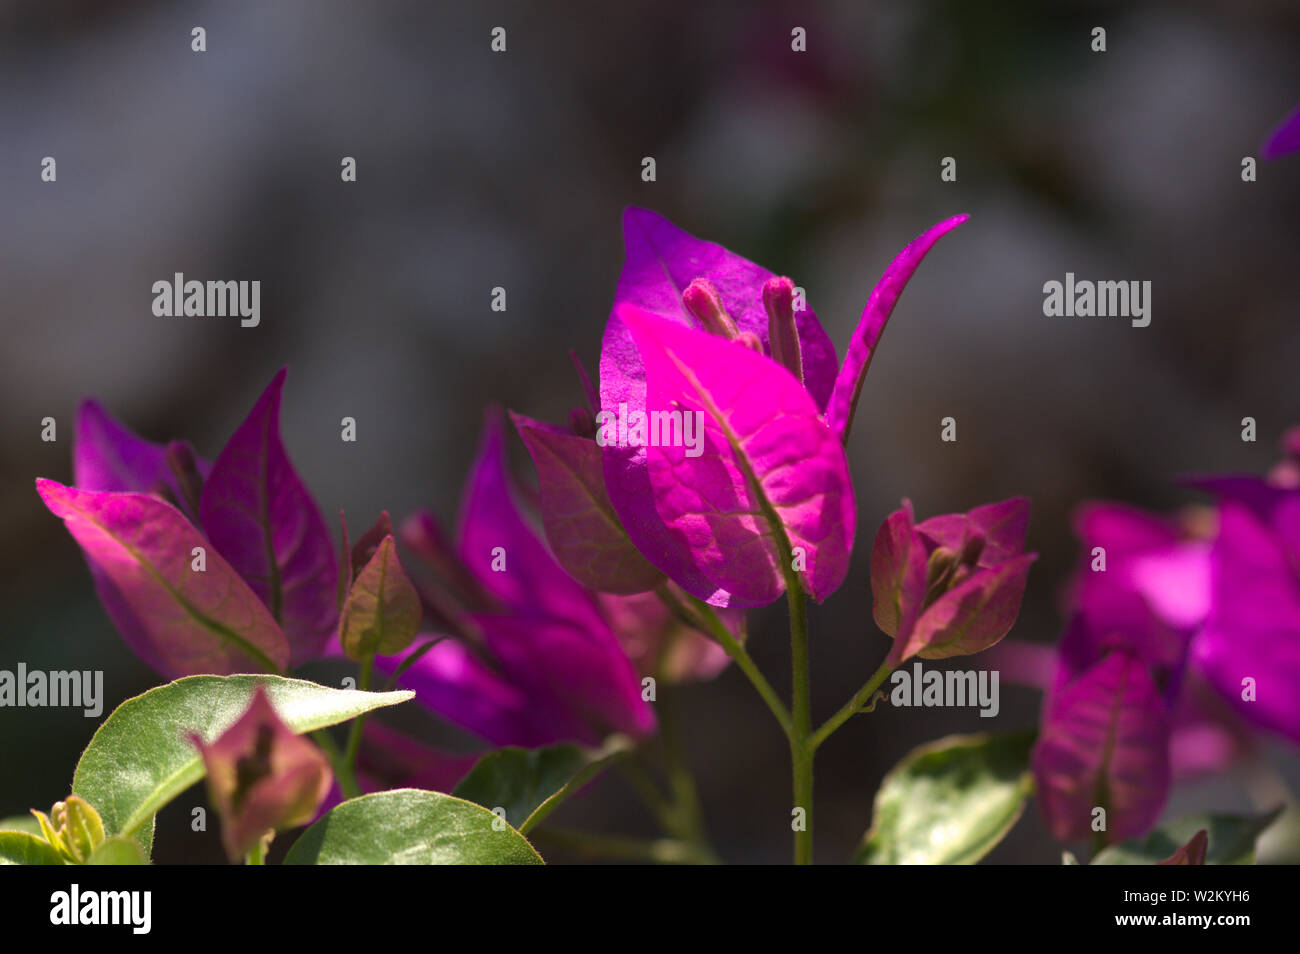 Flowers of the Bougainvillea purple plant bathed by a ray of sun, the background blurred and the rest of the plant darker Stock Photo